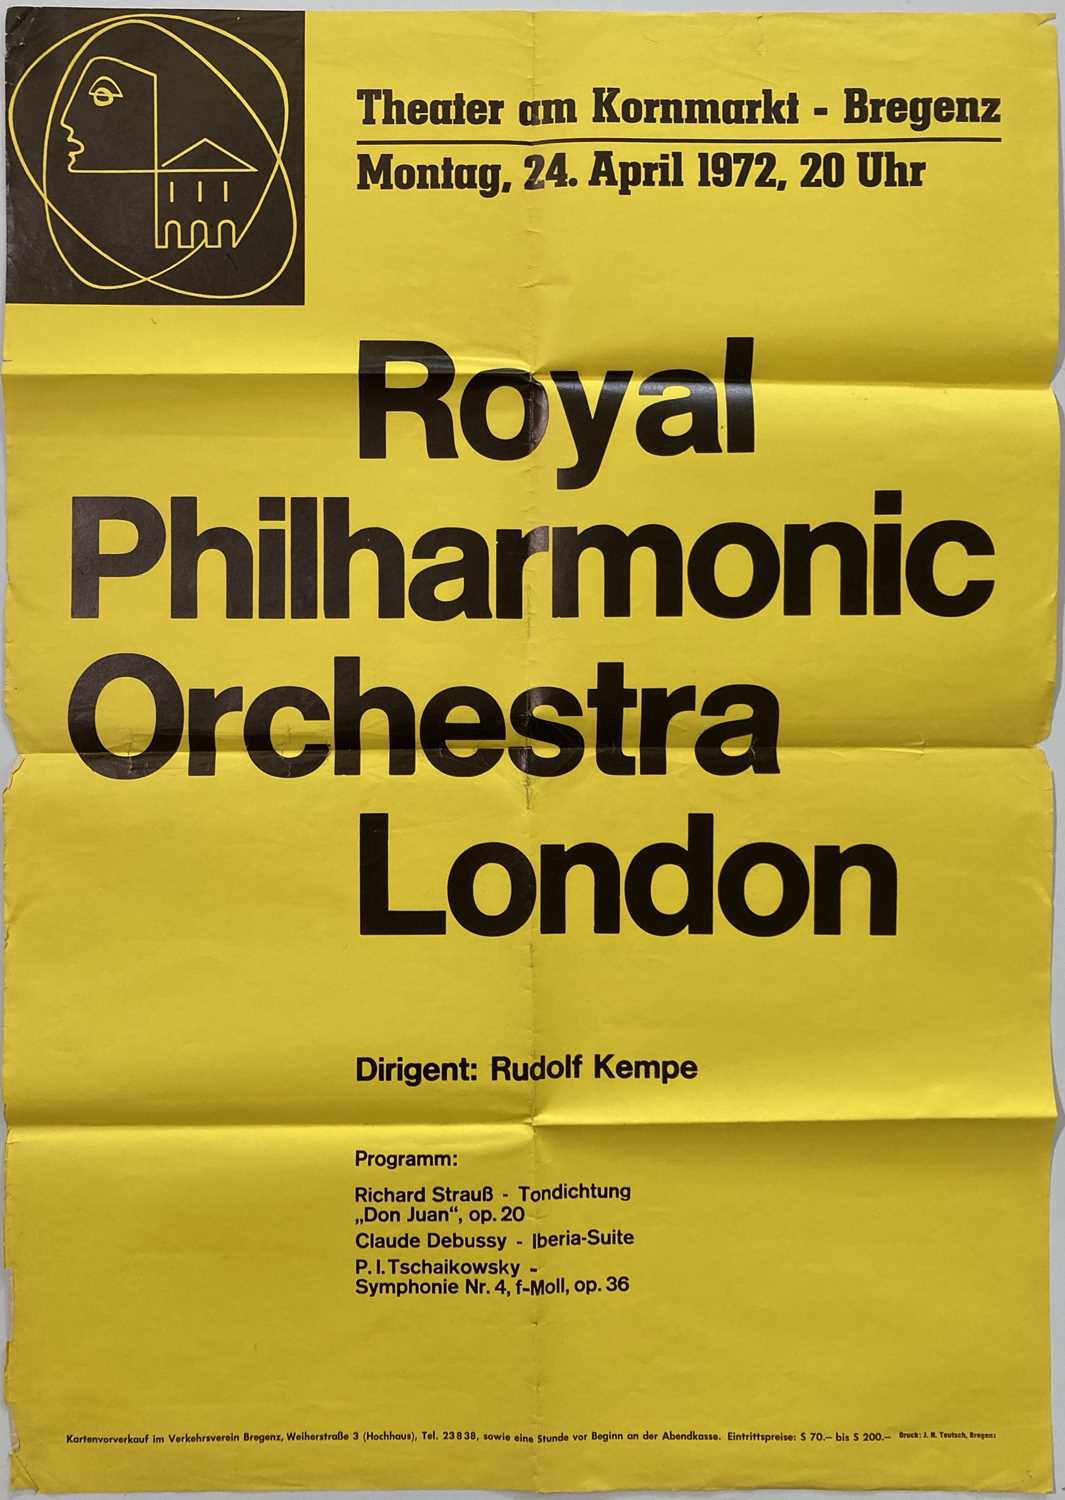 CLASSICAL MUSIC - INTERNATIONAL ORCHESTRAS - CONCERT PROGRAMMES / POSTERS - Image 2 of 15